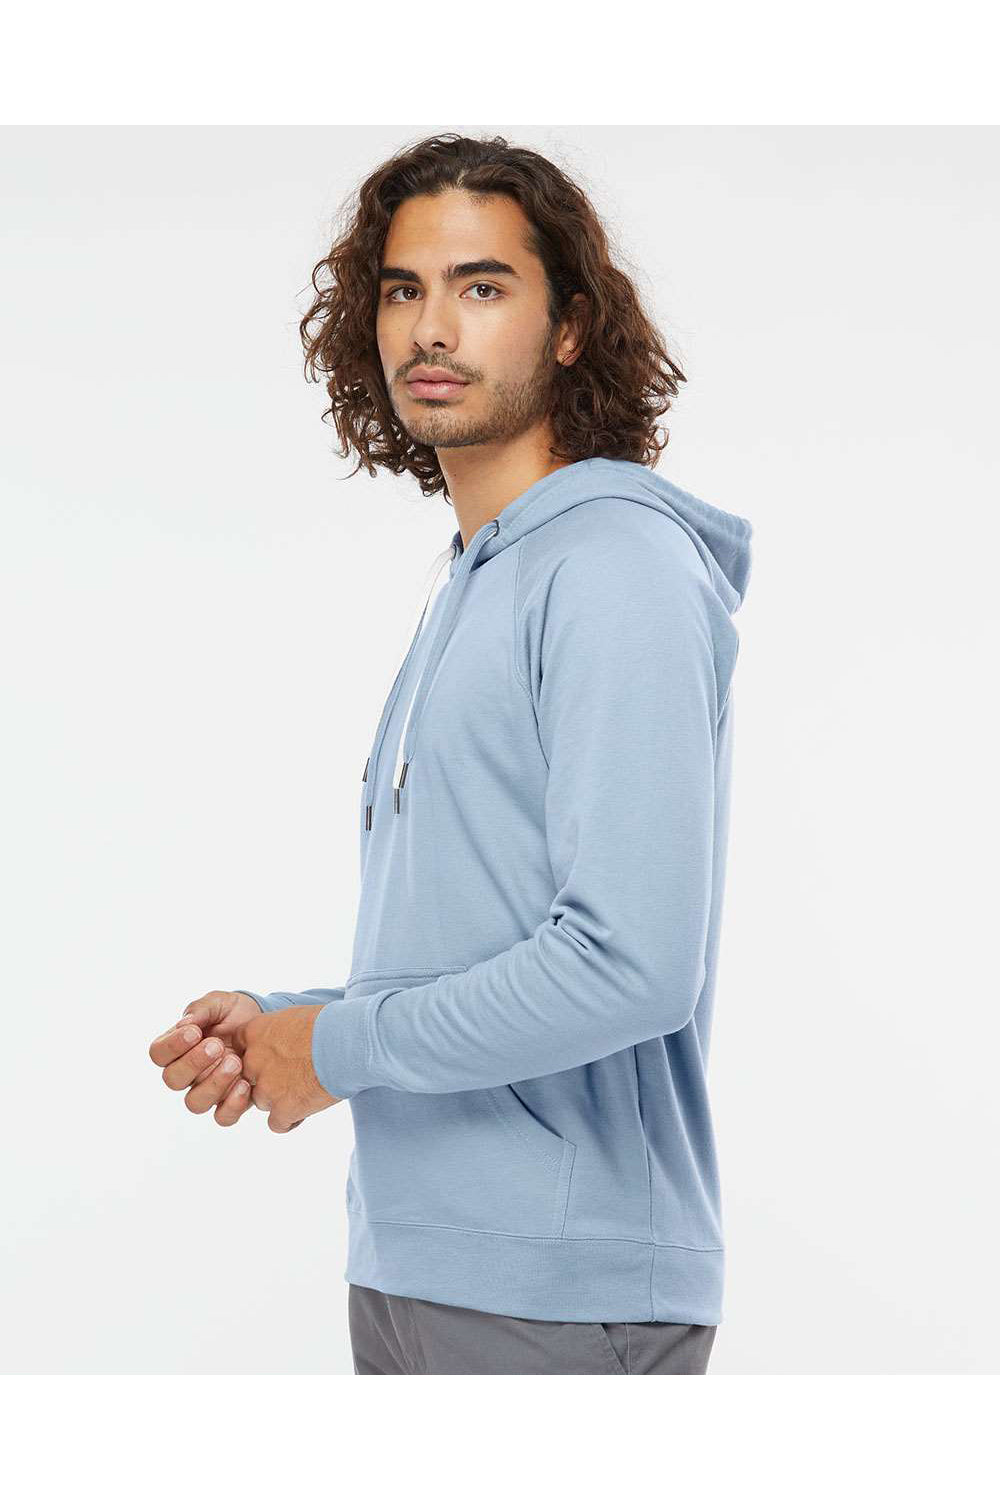 Independent Trading Co. SS1000 Mens Icon Loopback Terry Hooded Sweatshirt Hoodie Misty Blue Model Side